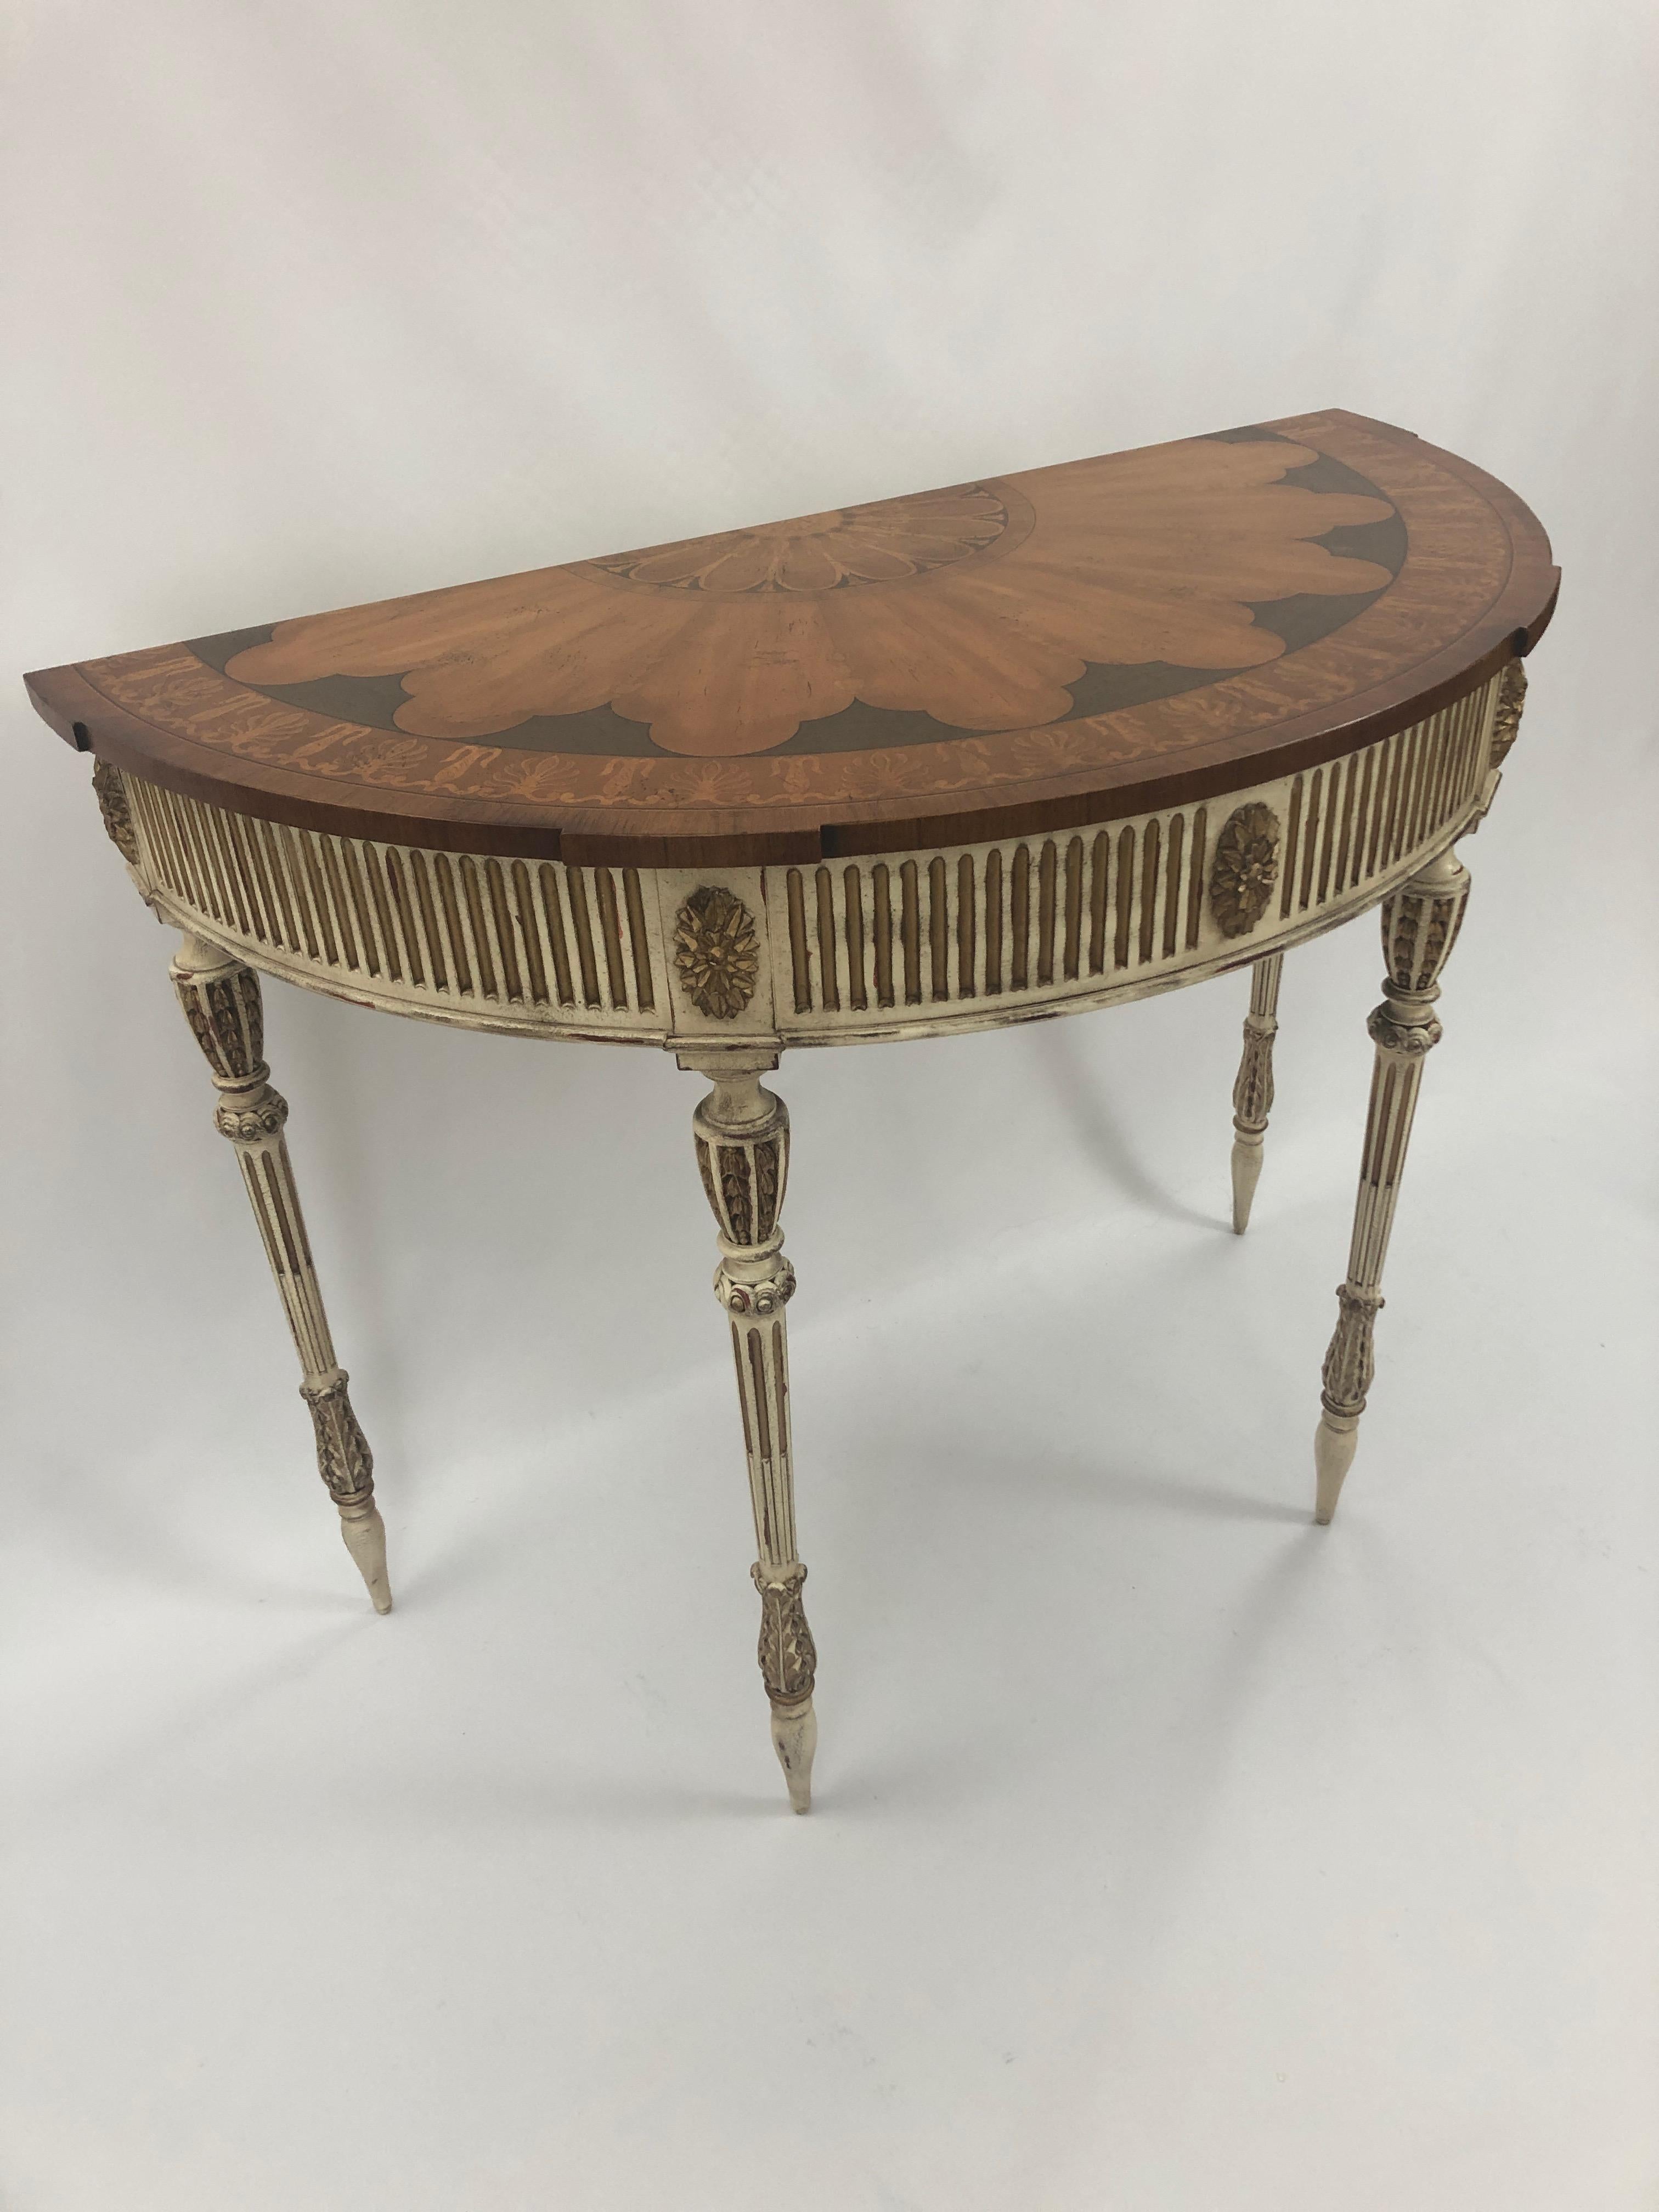 Sublimely Pretty Satinwood Inlay Painted and Gilded Demilune Console Table 3